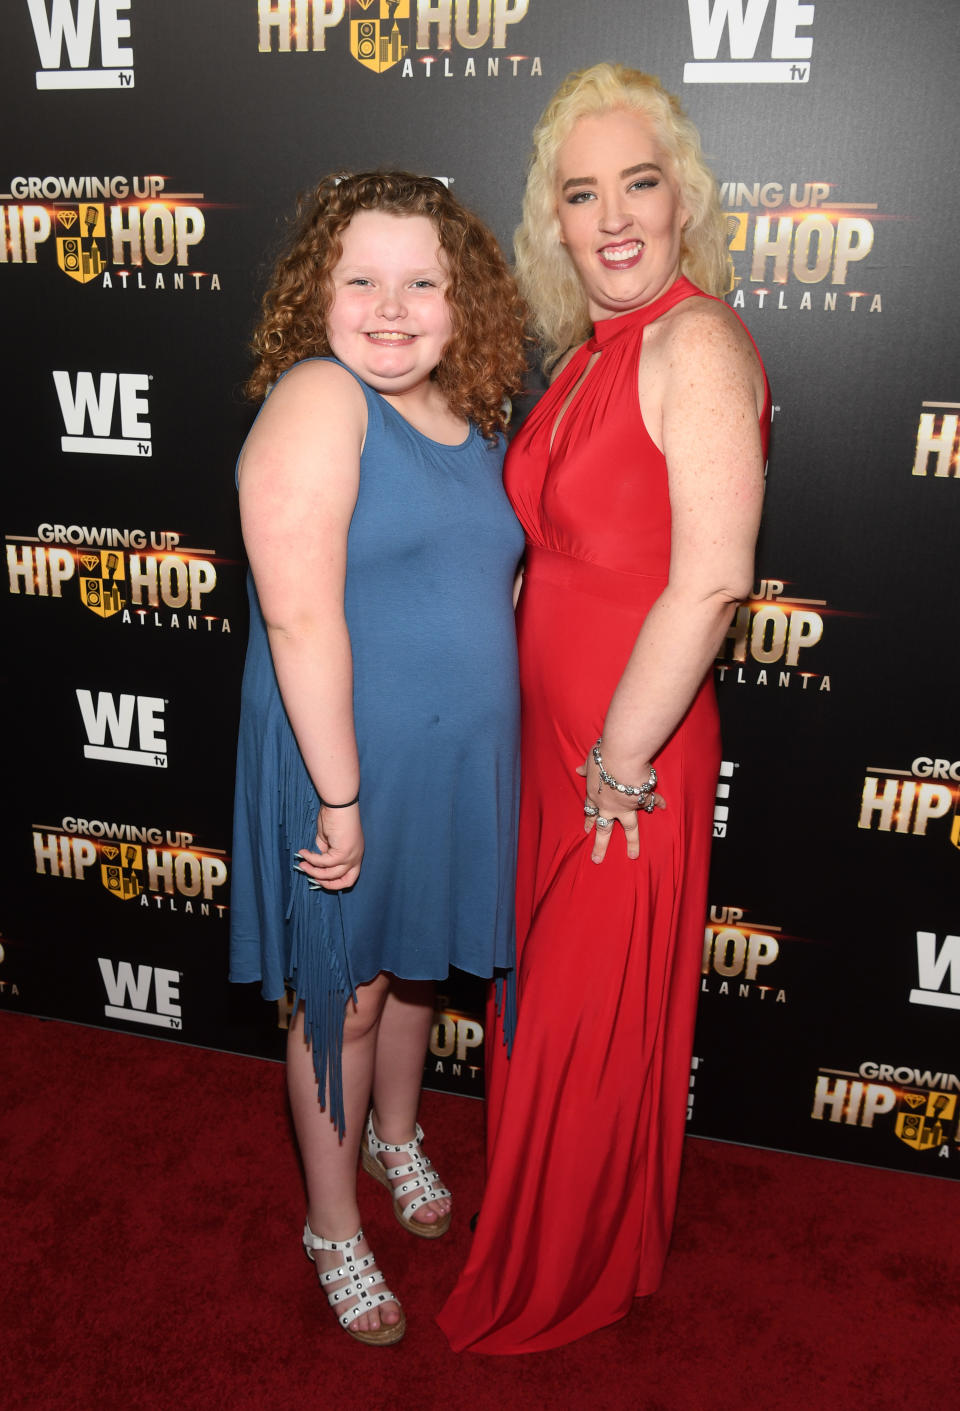 Television personalities Alana Thompson and June Shannon attends "Growing Up Hip Hop Atlanta" Atlanta Premiere in 2017